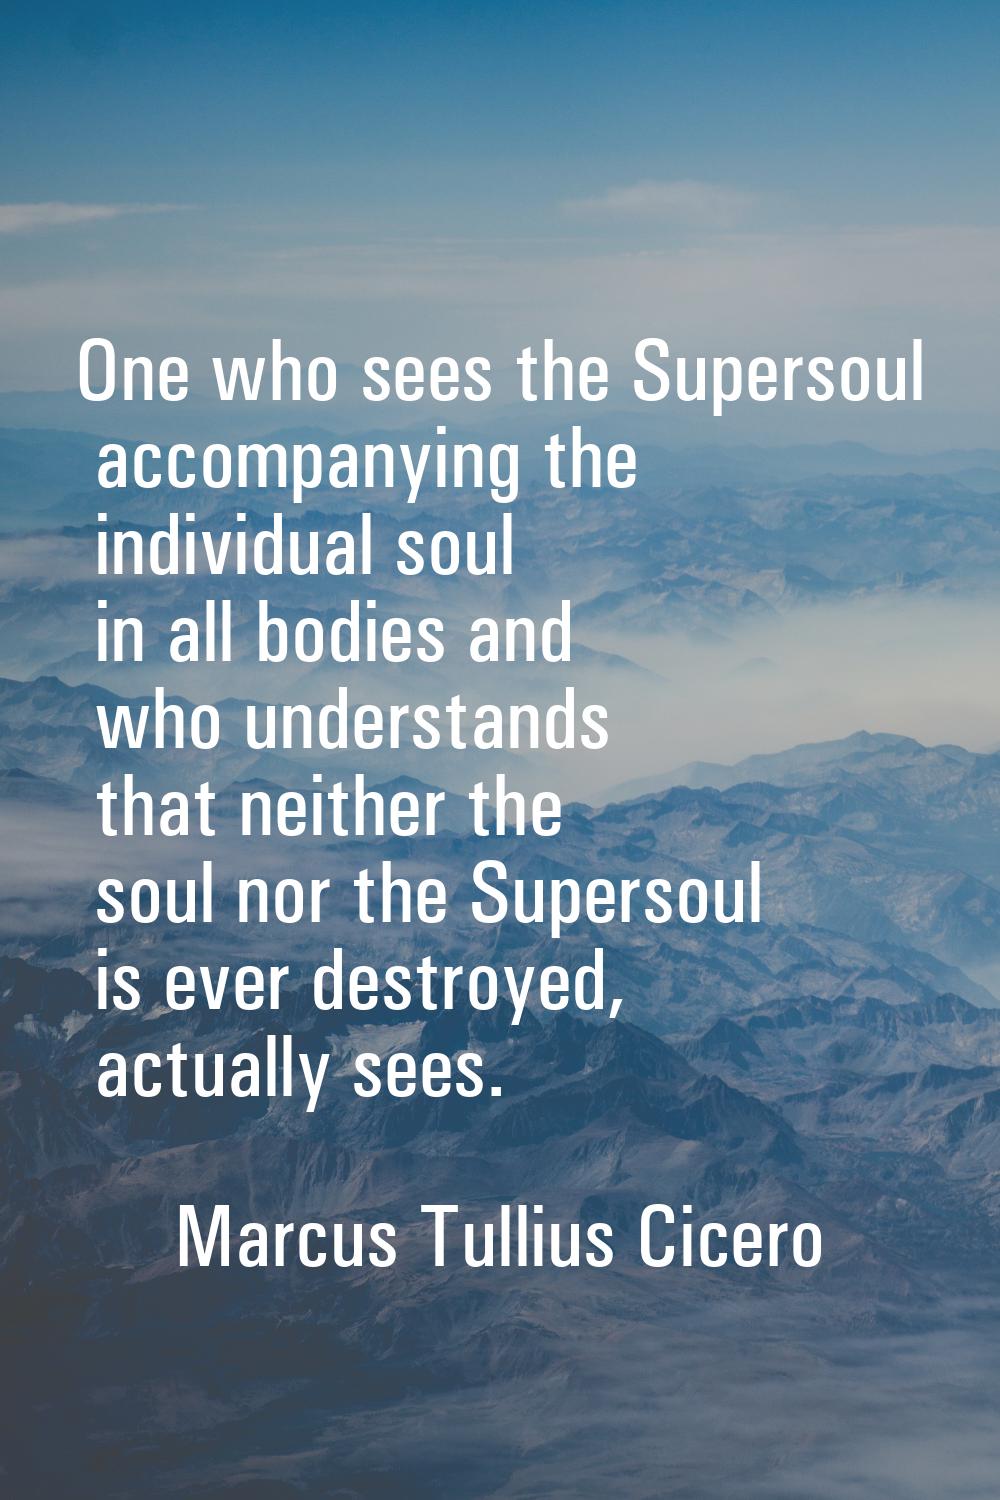 One who sees the Supersoul accompanying the individual soul in all bodies and who understands that 